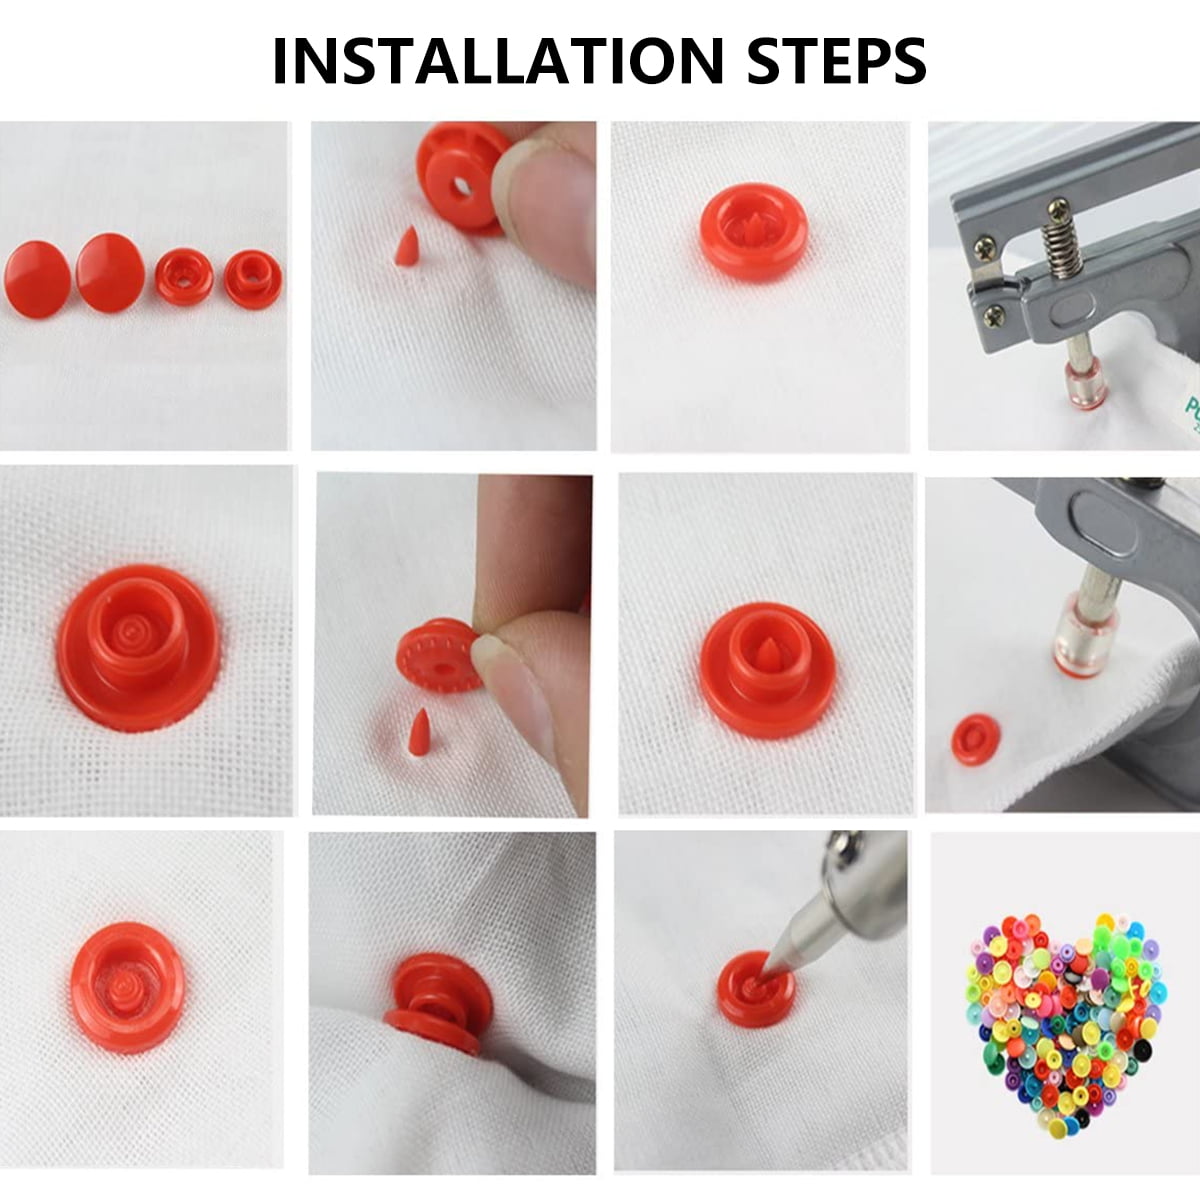 50pcs/set Colorful T5 Plastic Snaps Buttons For Diy Sewing, Bibs